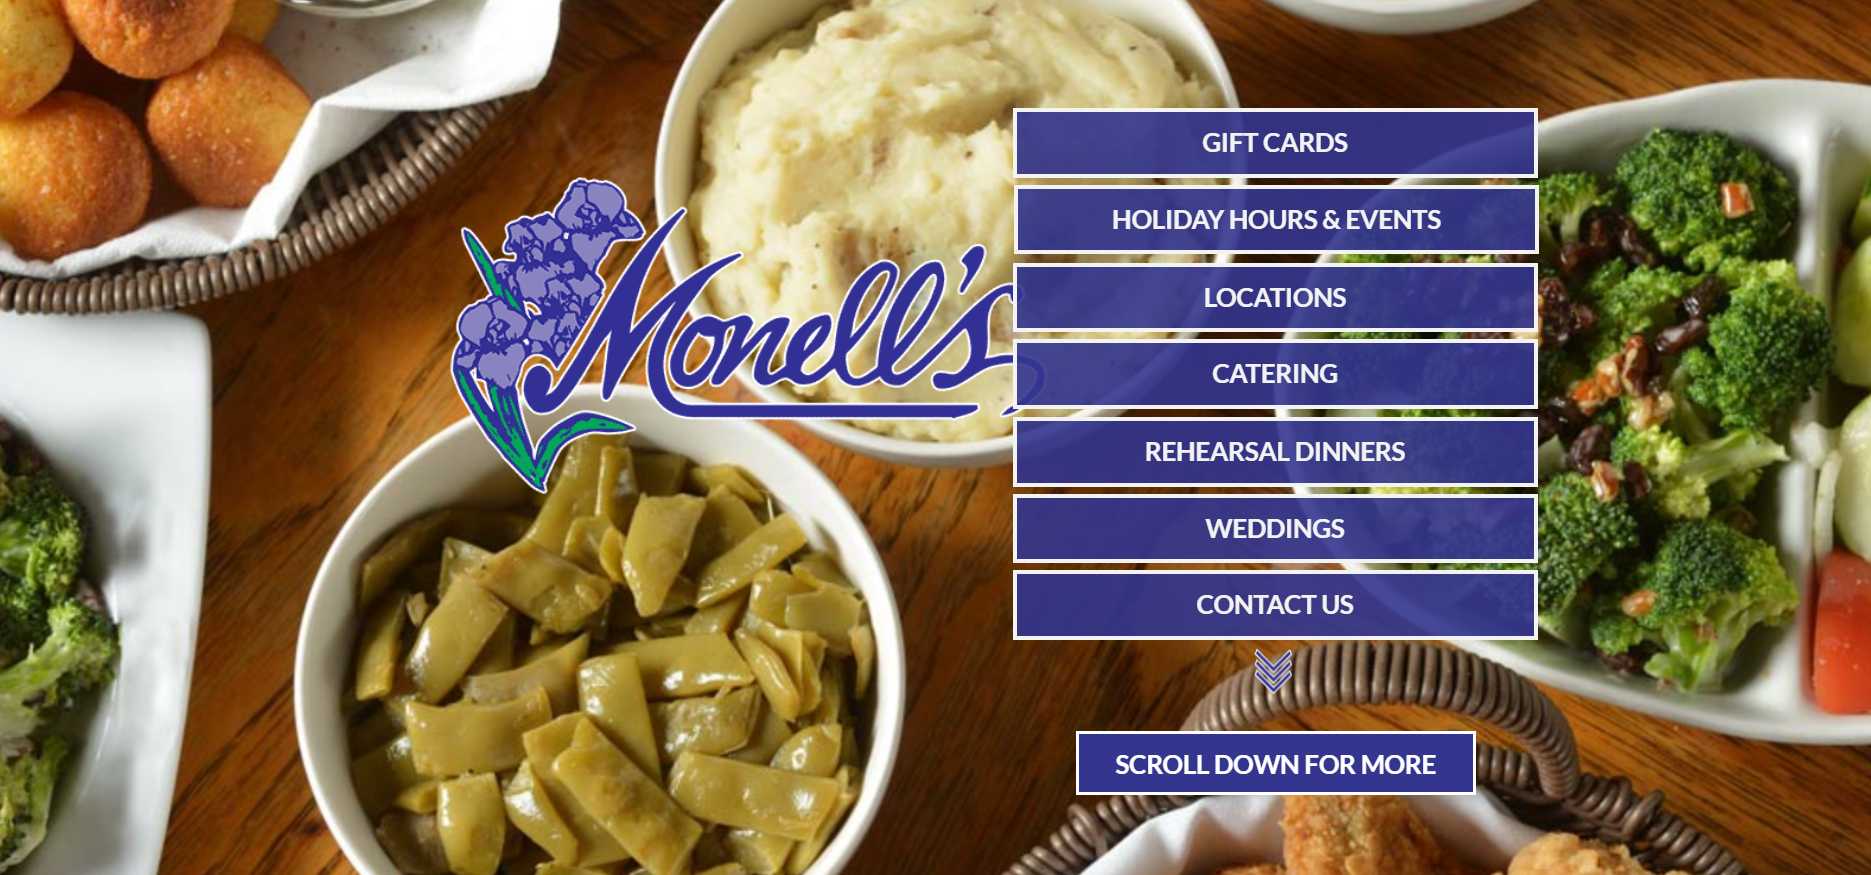 Monells Dining and Catering